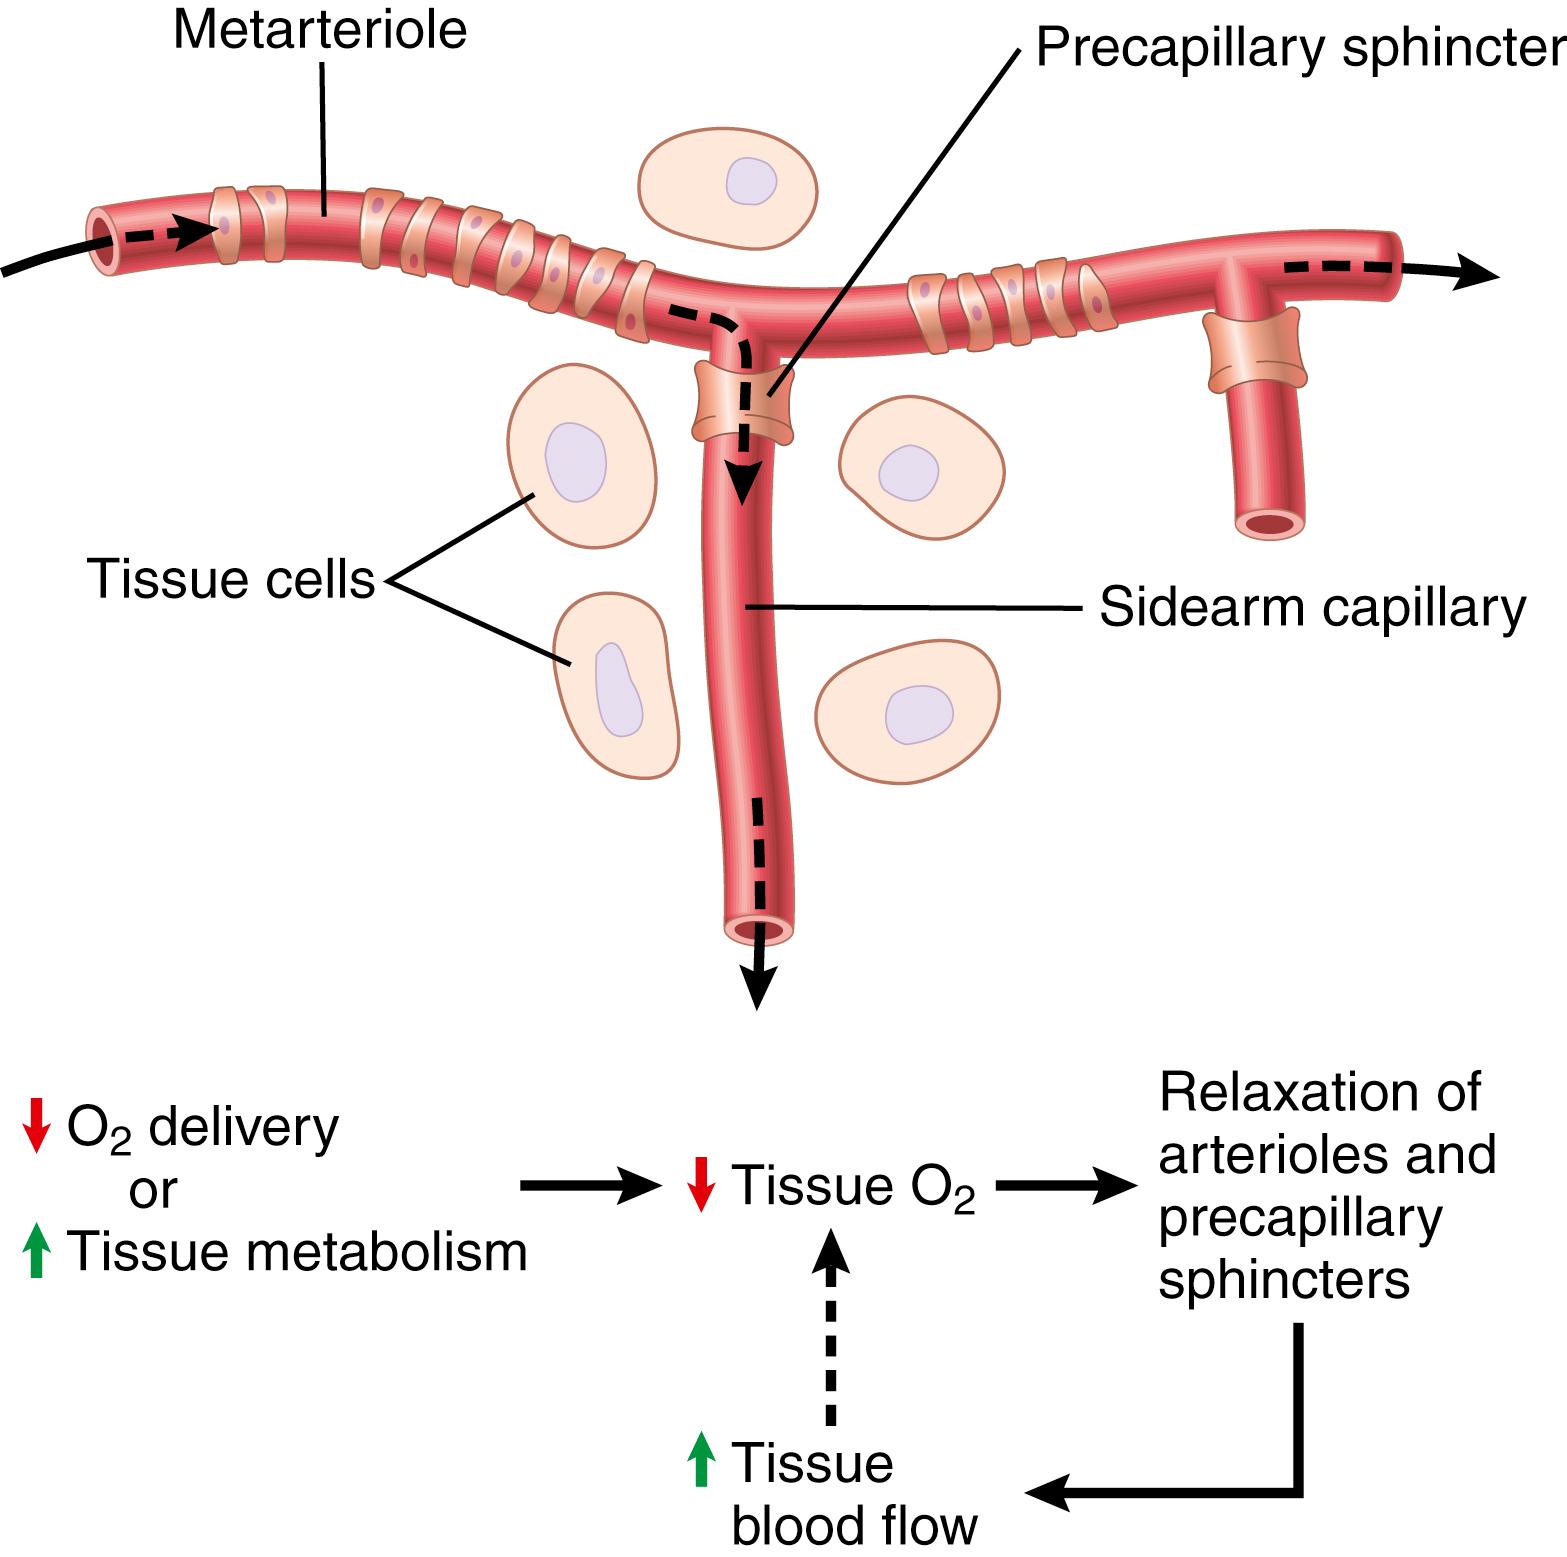 Figure 17-3., Diagram of a tissue unit area for an explanation of acute local feedback control of blood flow, showing a metarteriole passing through the tissue and a sidearm capillary with its precapillary sphincter for controlling capillary blood flow.